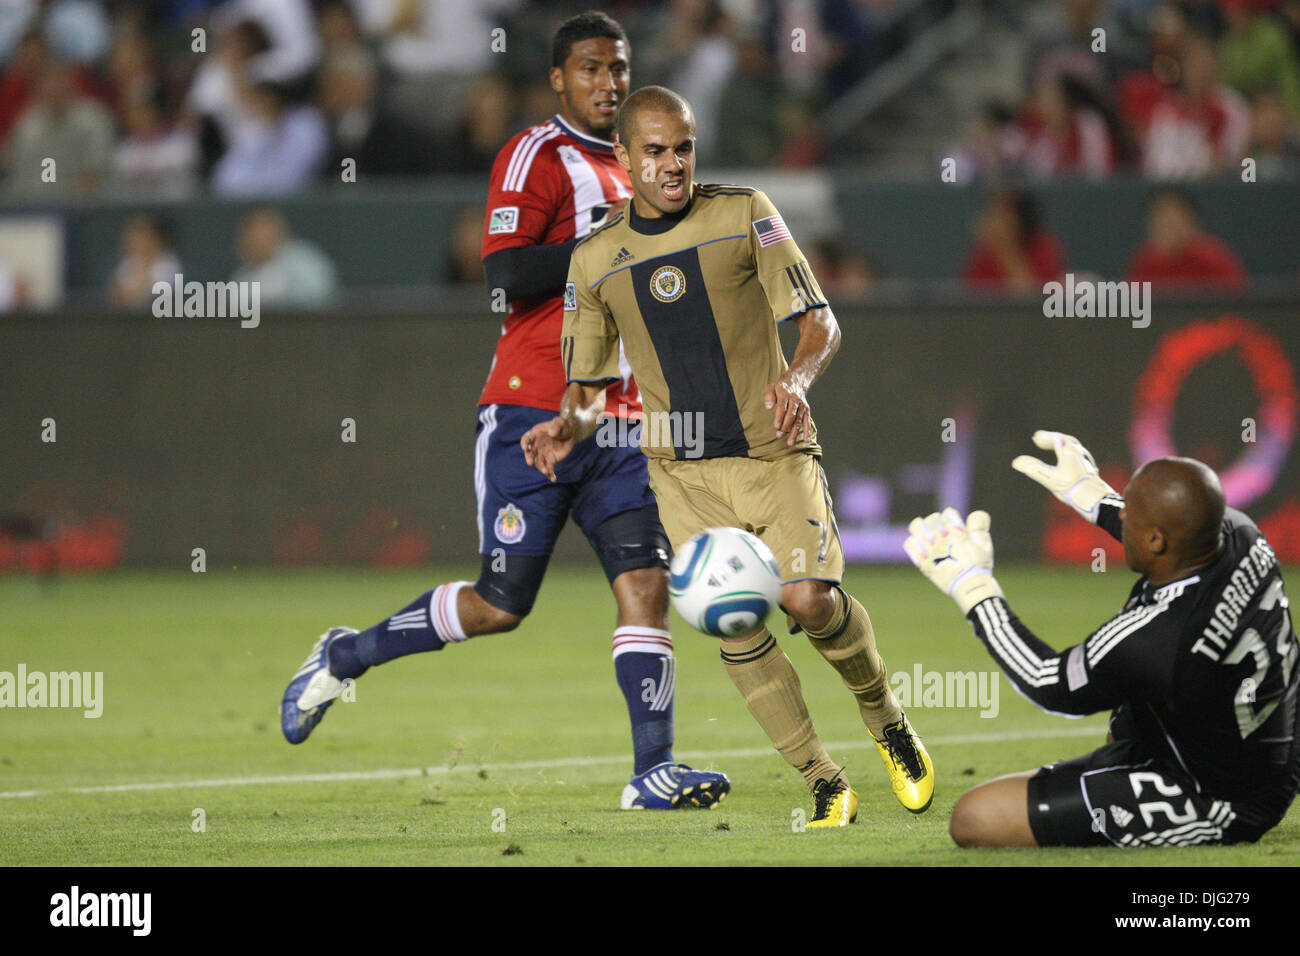 3 July 2010: Philadelphia Union M #7 Fred (MID) gets past Chivas USA D #12 Dario Delgado (L) but gets his shot blocked by Chivas USA GK #22 Zach Thornton (R) during the Chivas USA vs Philadelphia Union game at the Home Depot Center in Carson, California. Chivas went on to tie the Union with a final score of 1-1. Mandatory Credit: Brandon Parry / Southcreek Global (Credit Image: © B Stock Photo